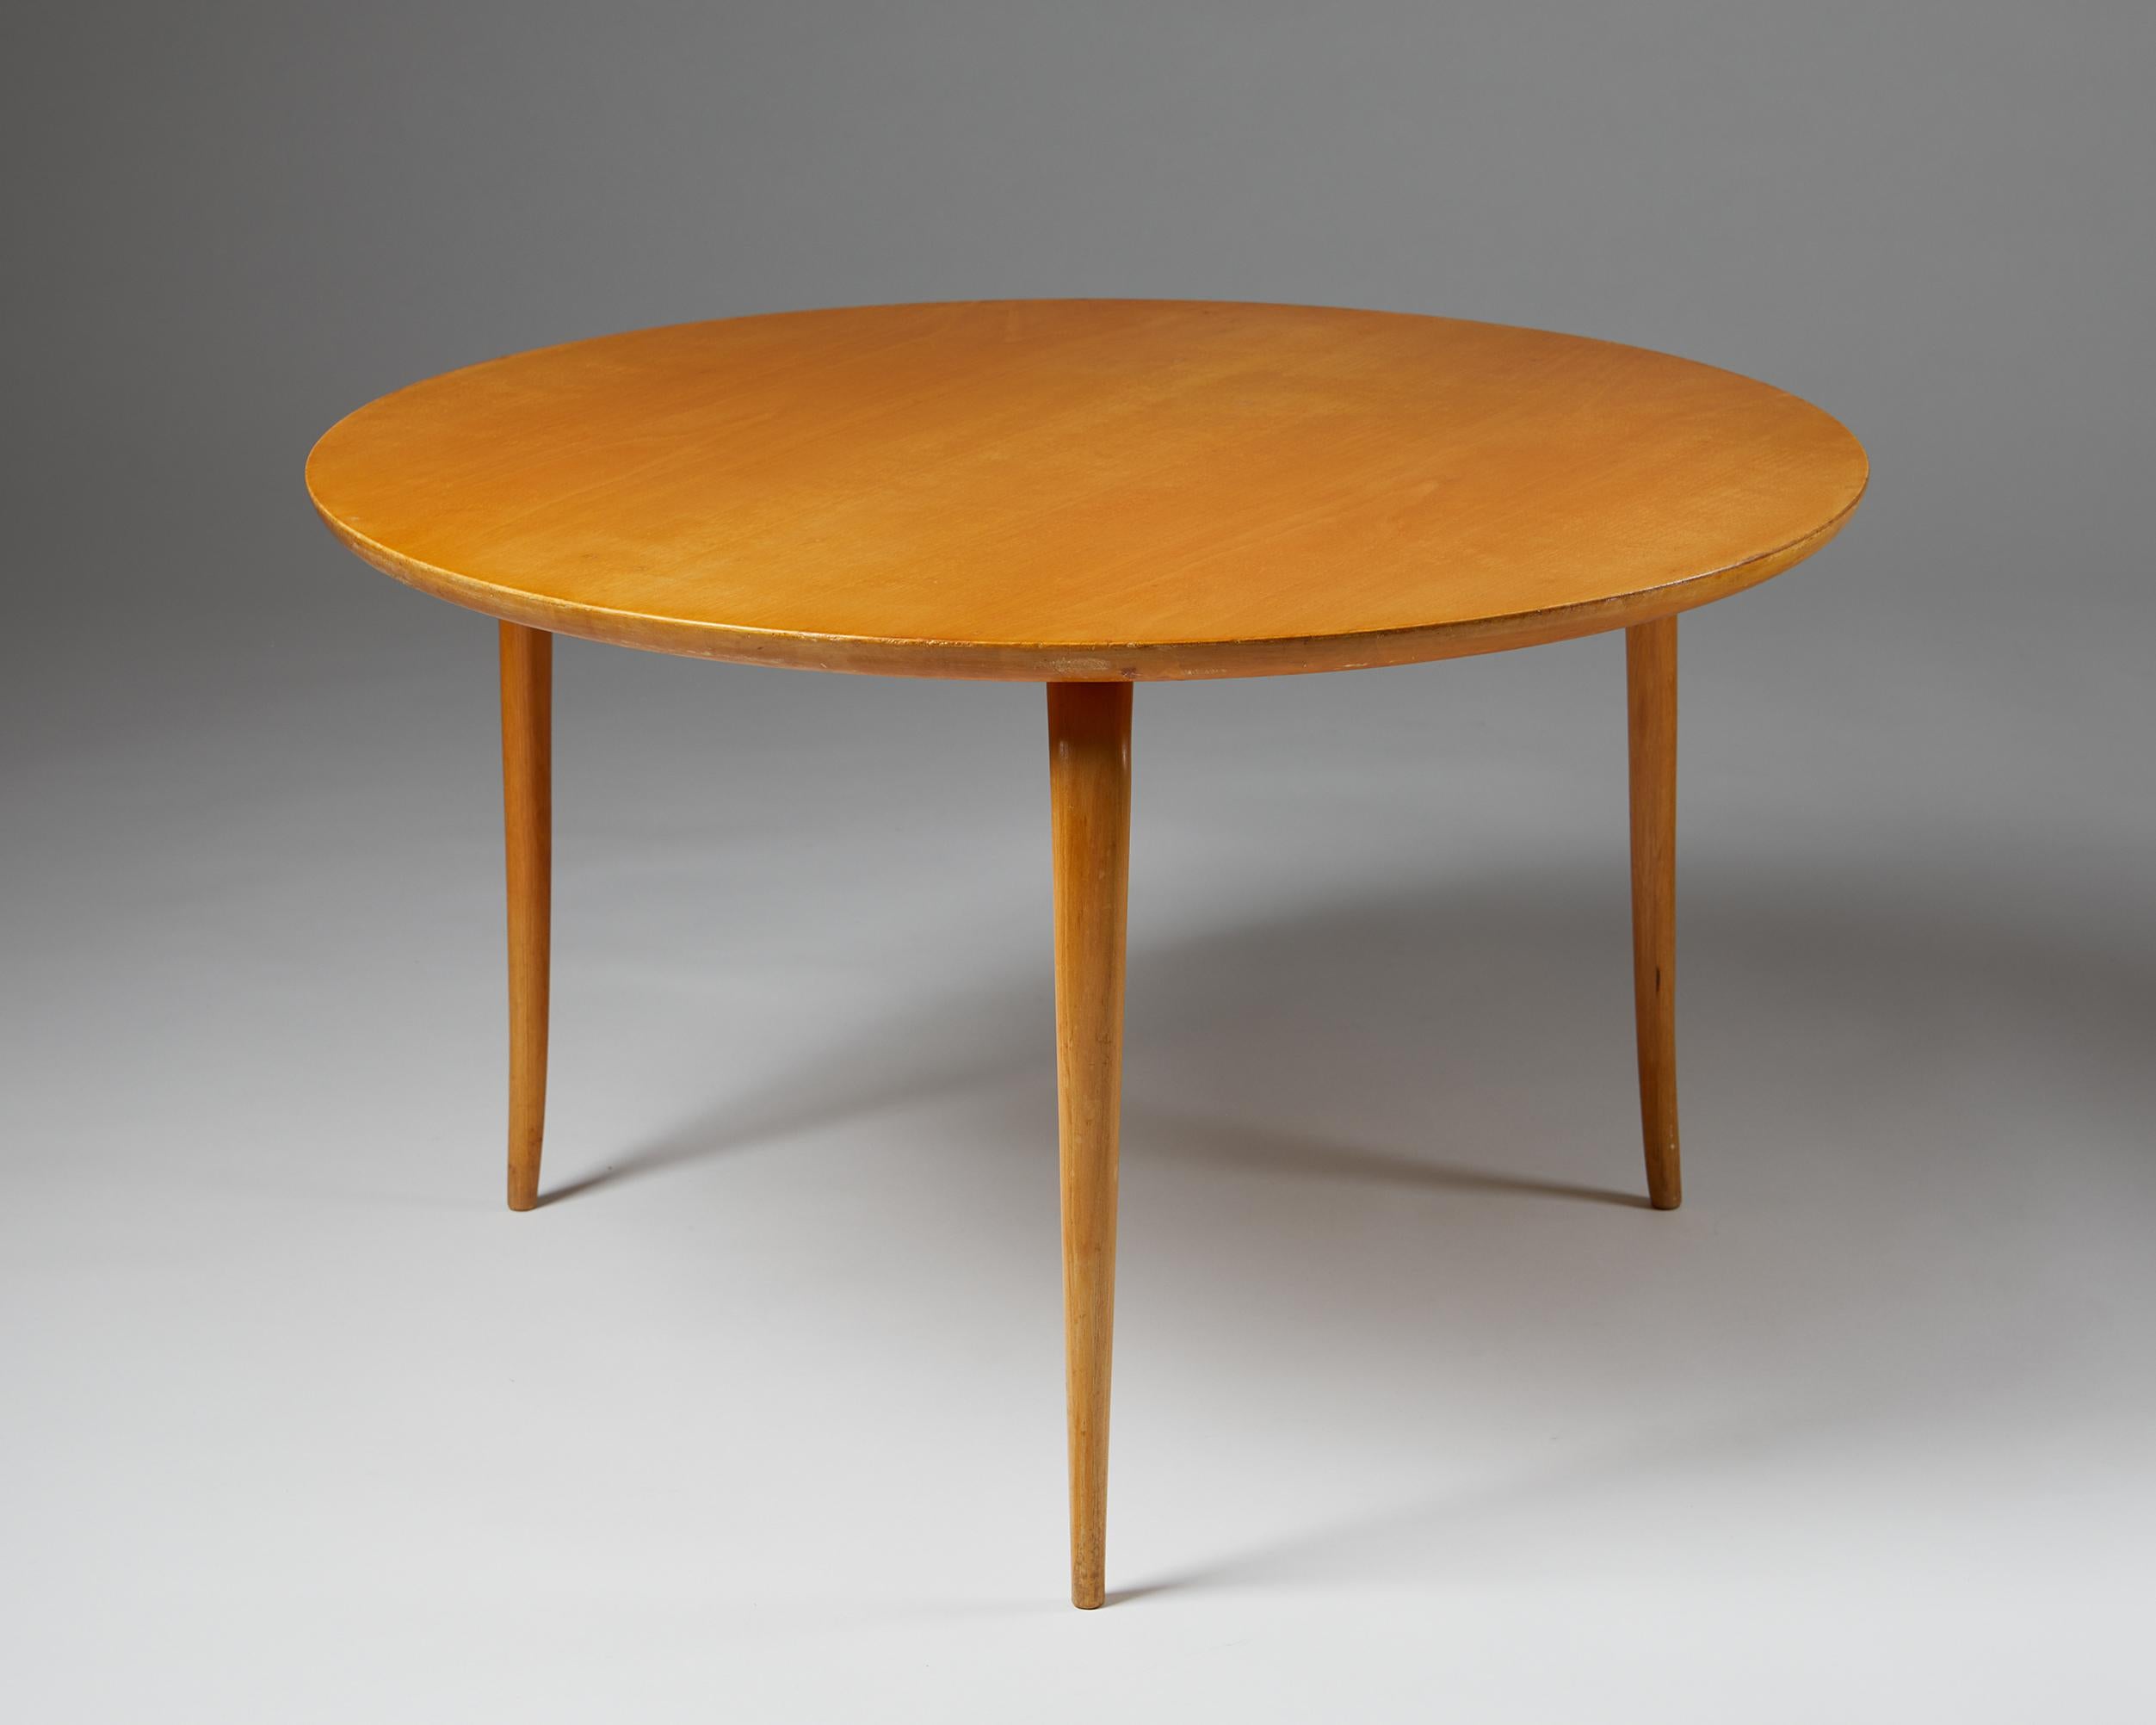 Swedish Occasional Table “Annika” Designed by Bruno Mathsson for Karl Mathsson, Sweden  For Sale